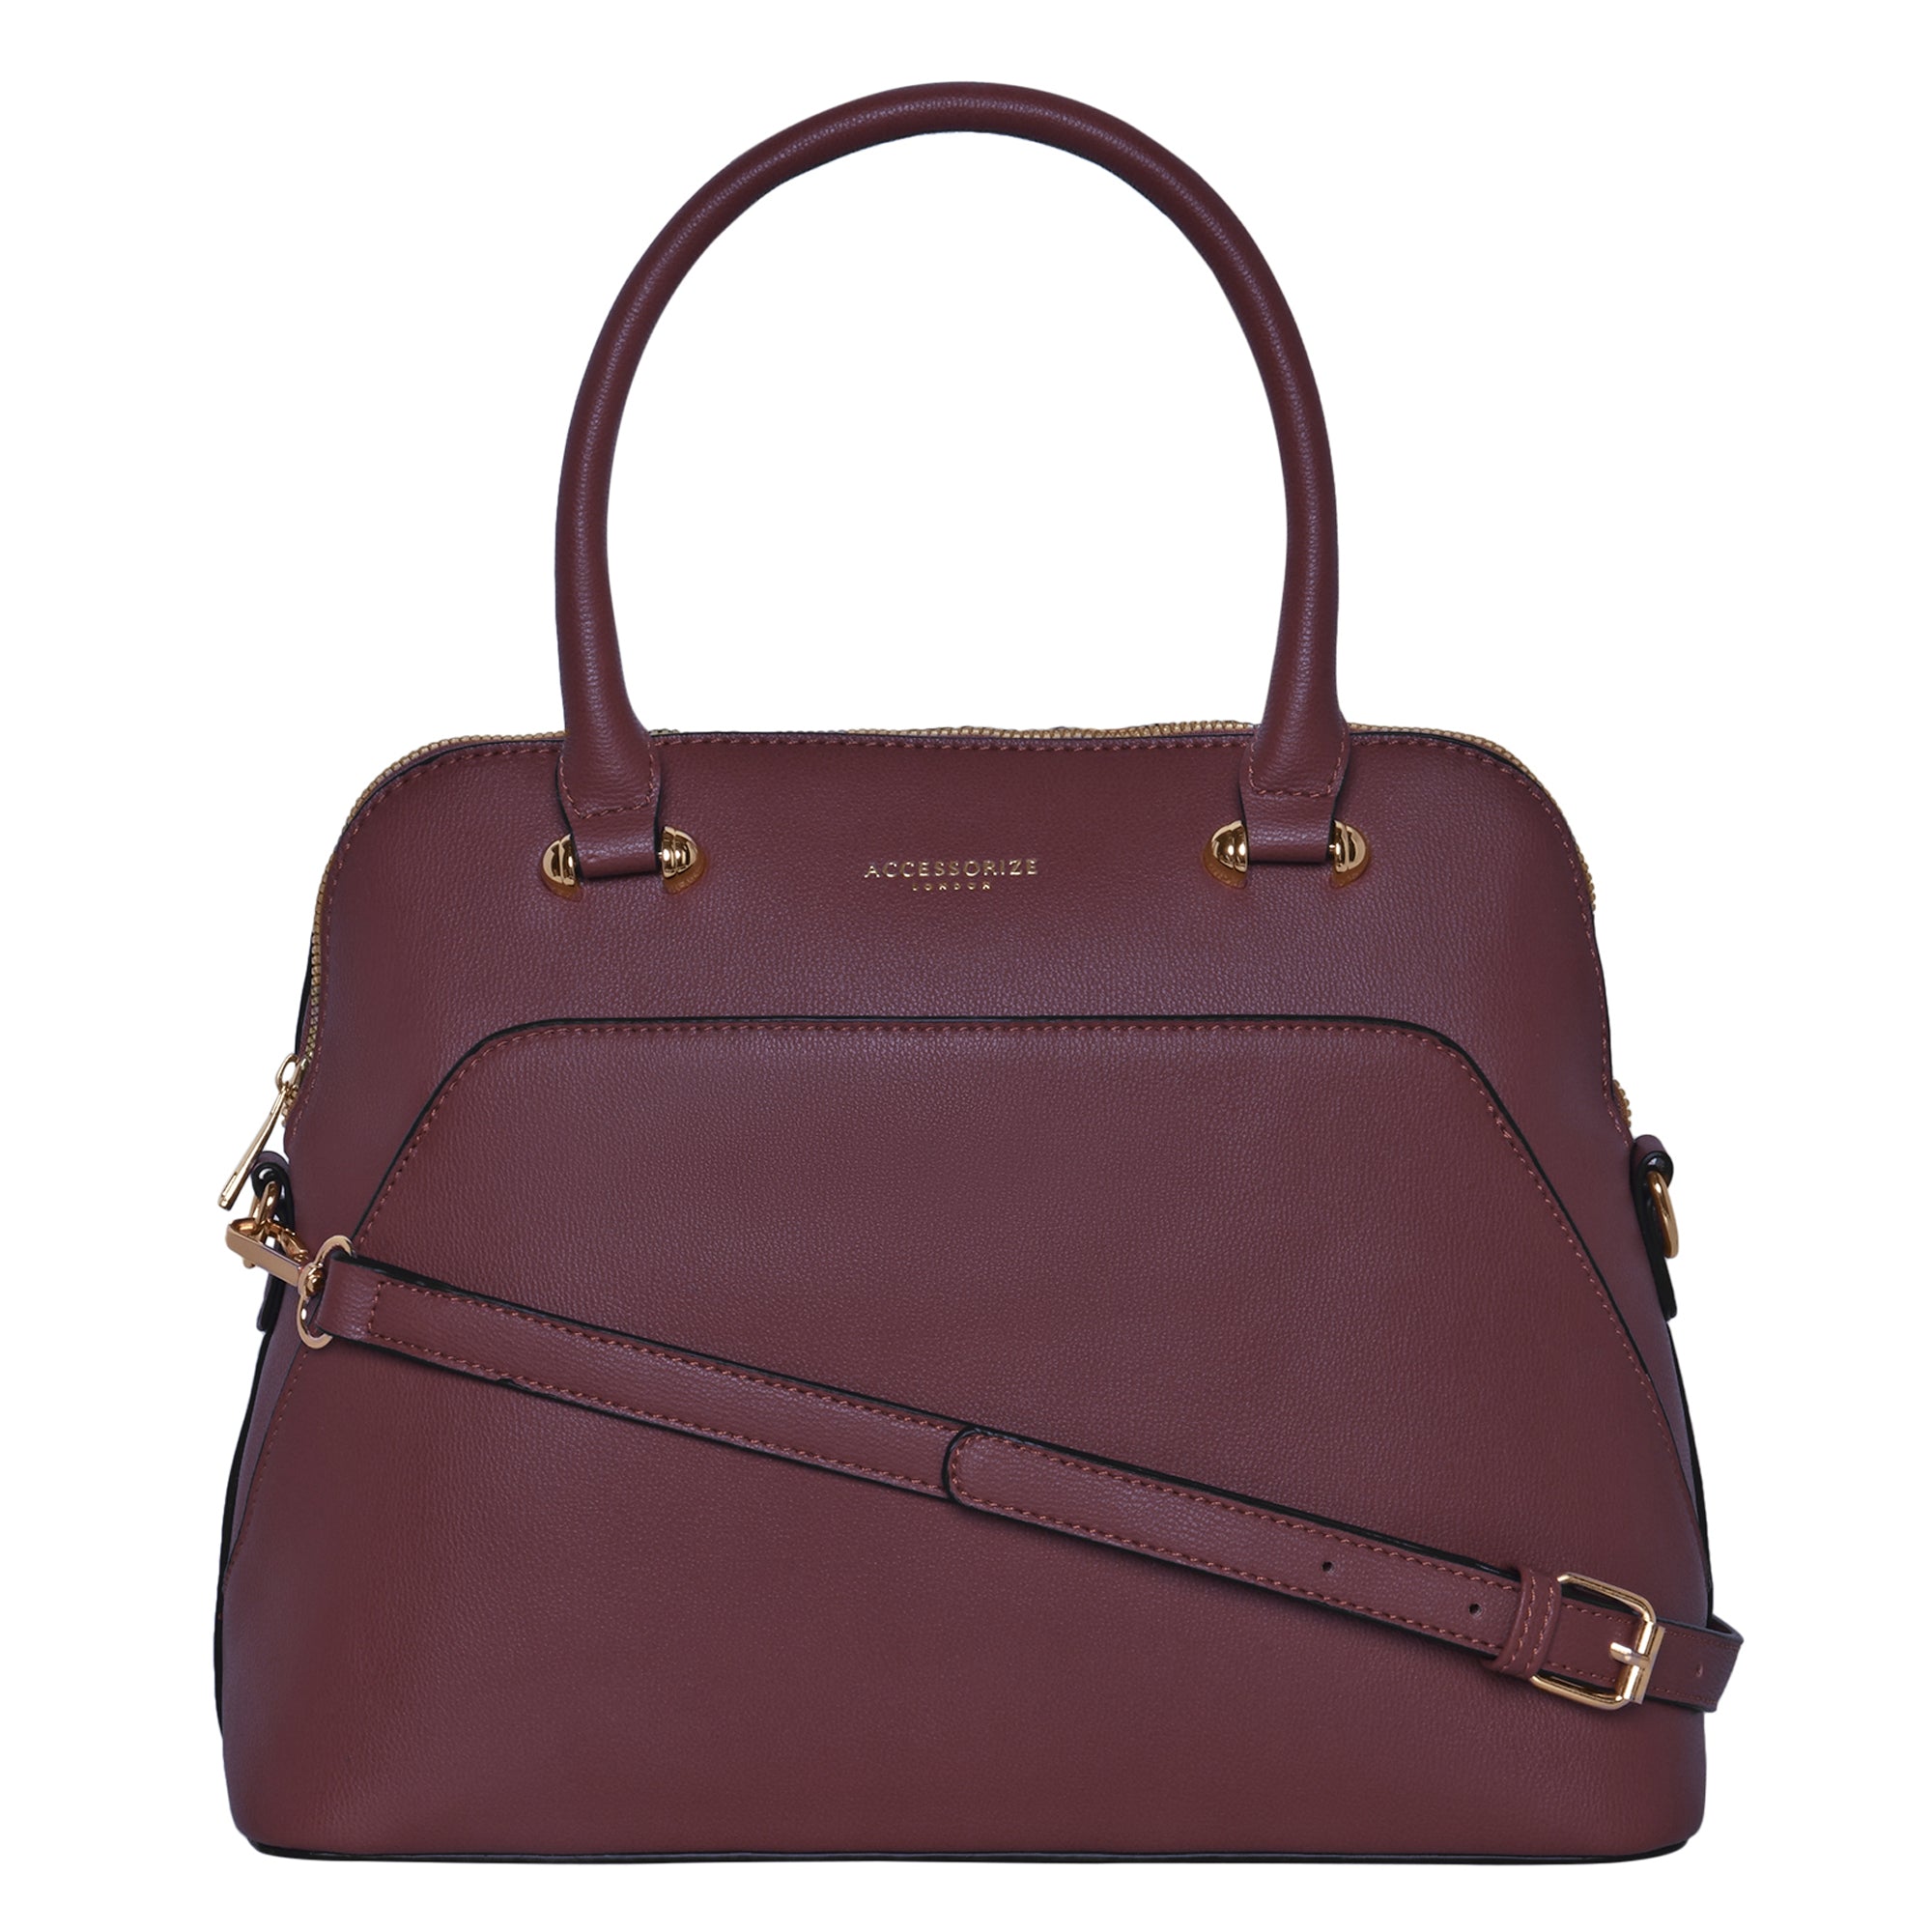 Accessorize London Women's Faux Leather Maroon Thea handheld bag